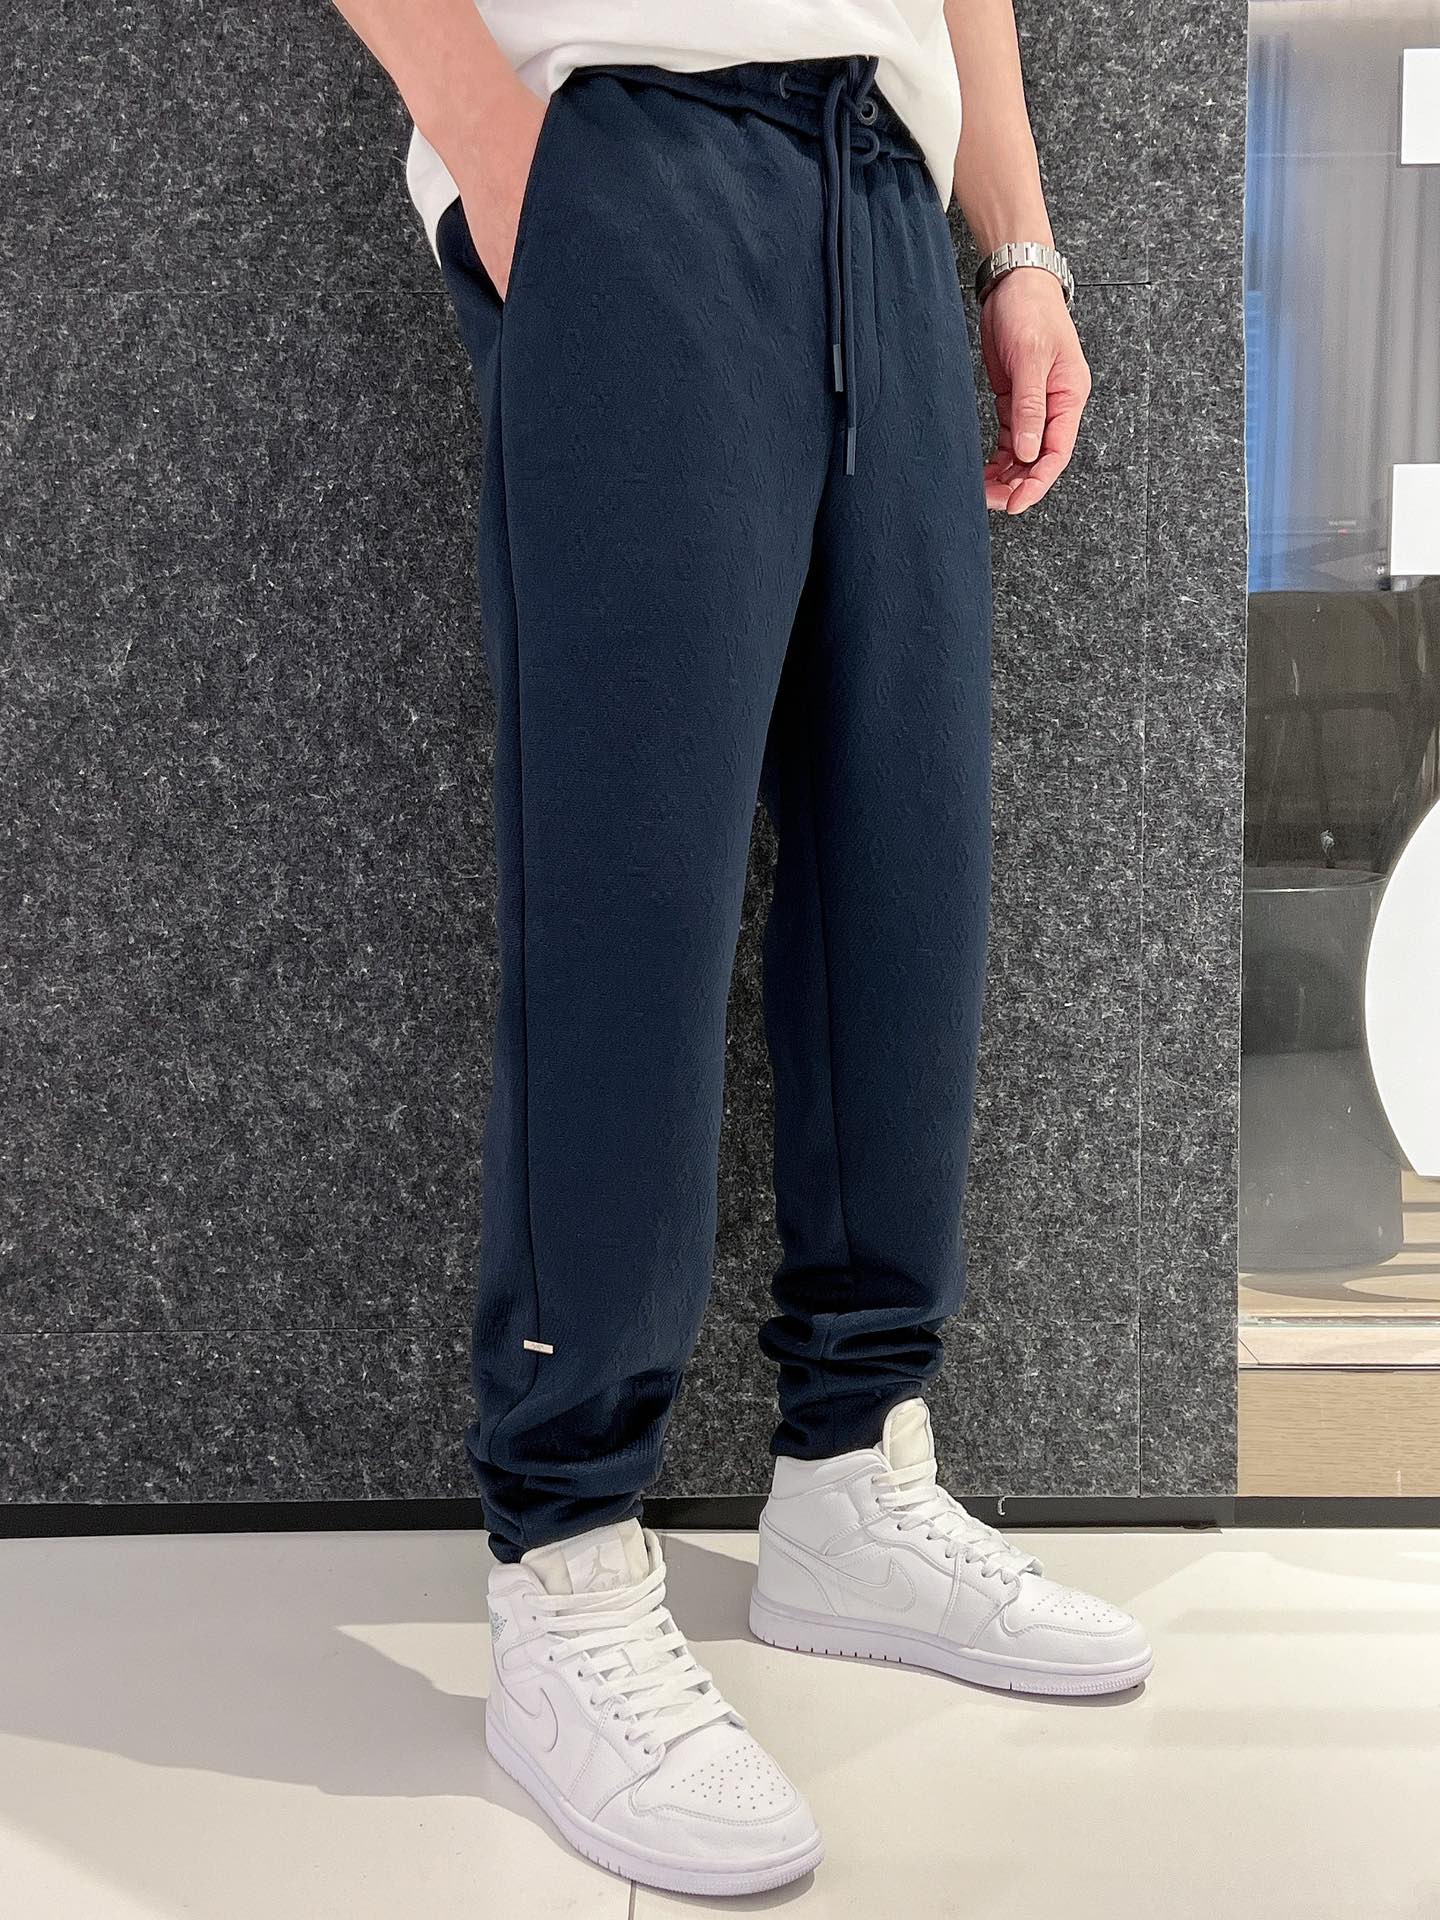 Louis Vuitton Designer
 Clothing Pants & Trousers Black Blue Grey Cotton Spring/Summer Collection Fashion Casual